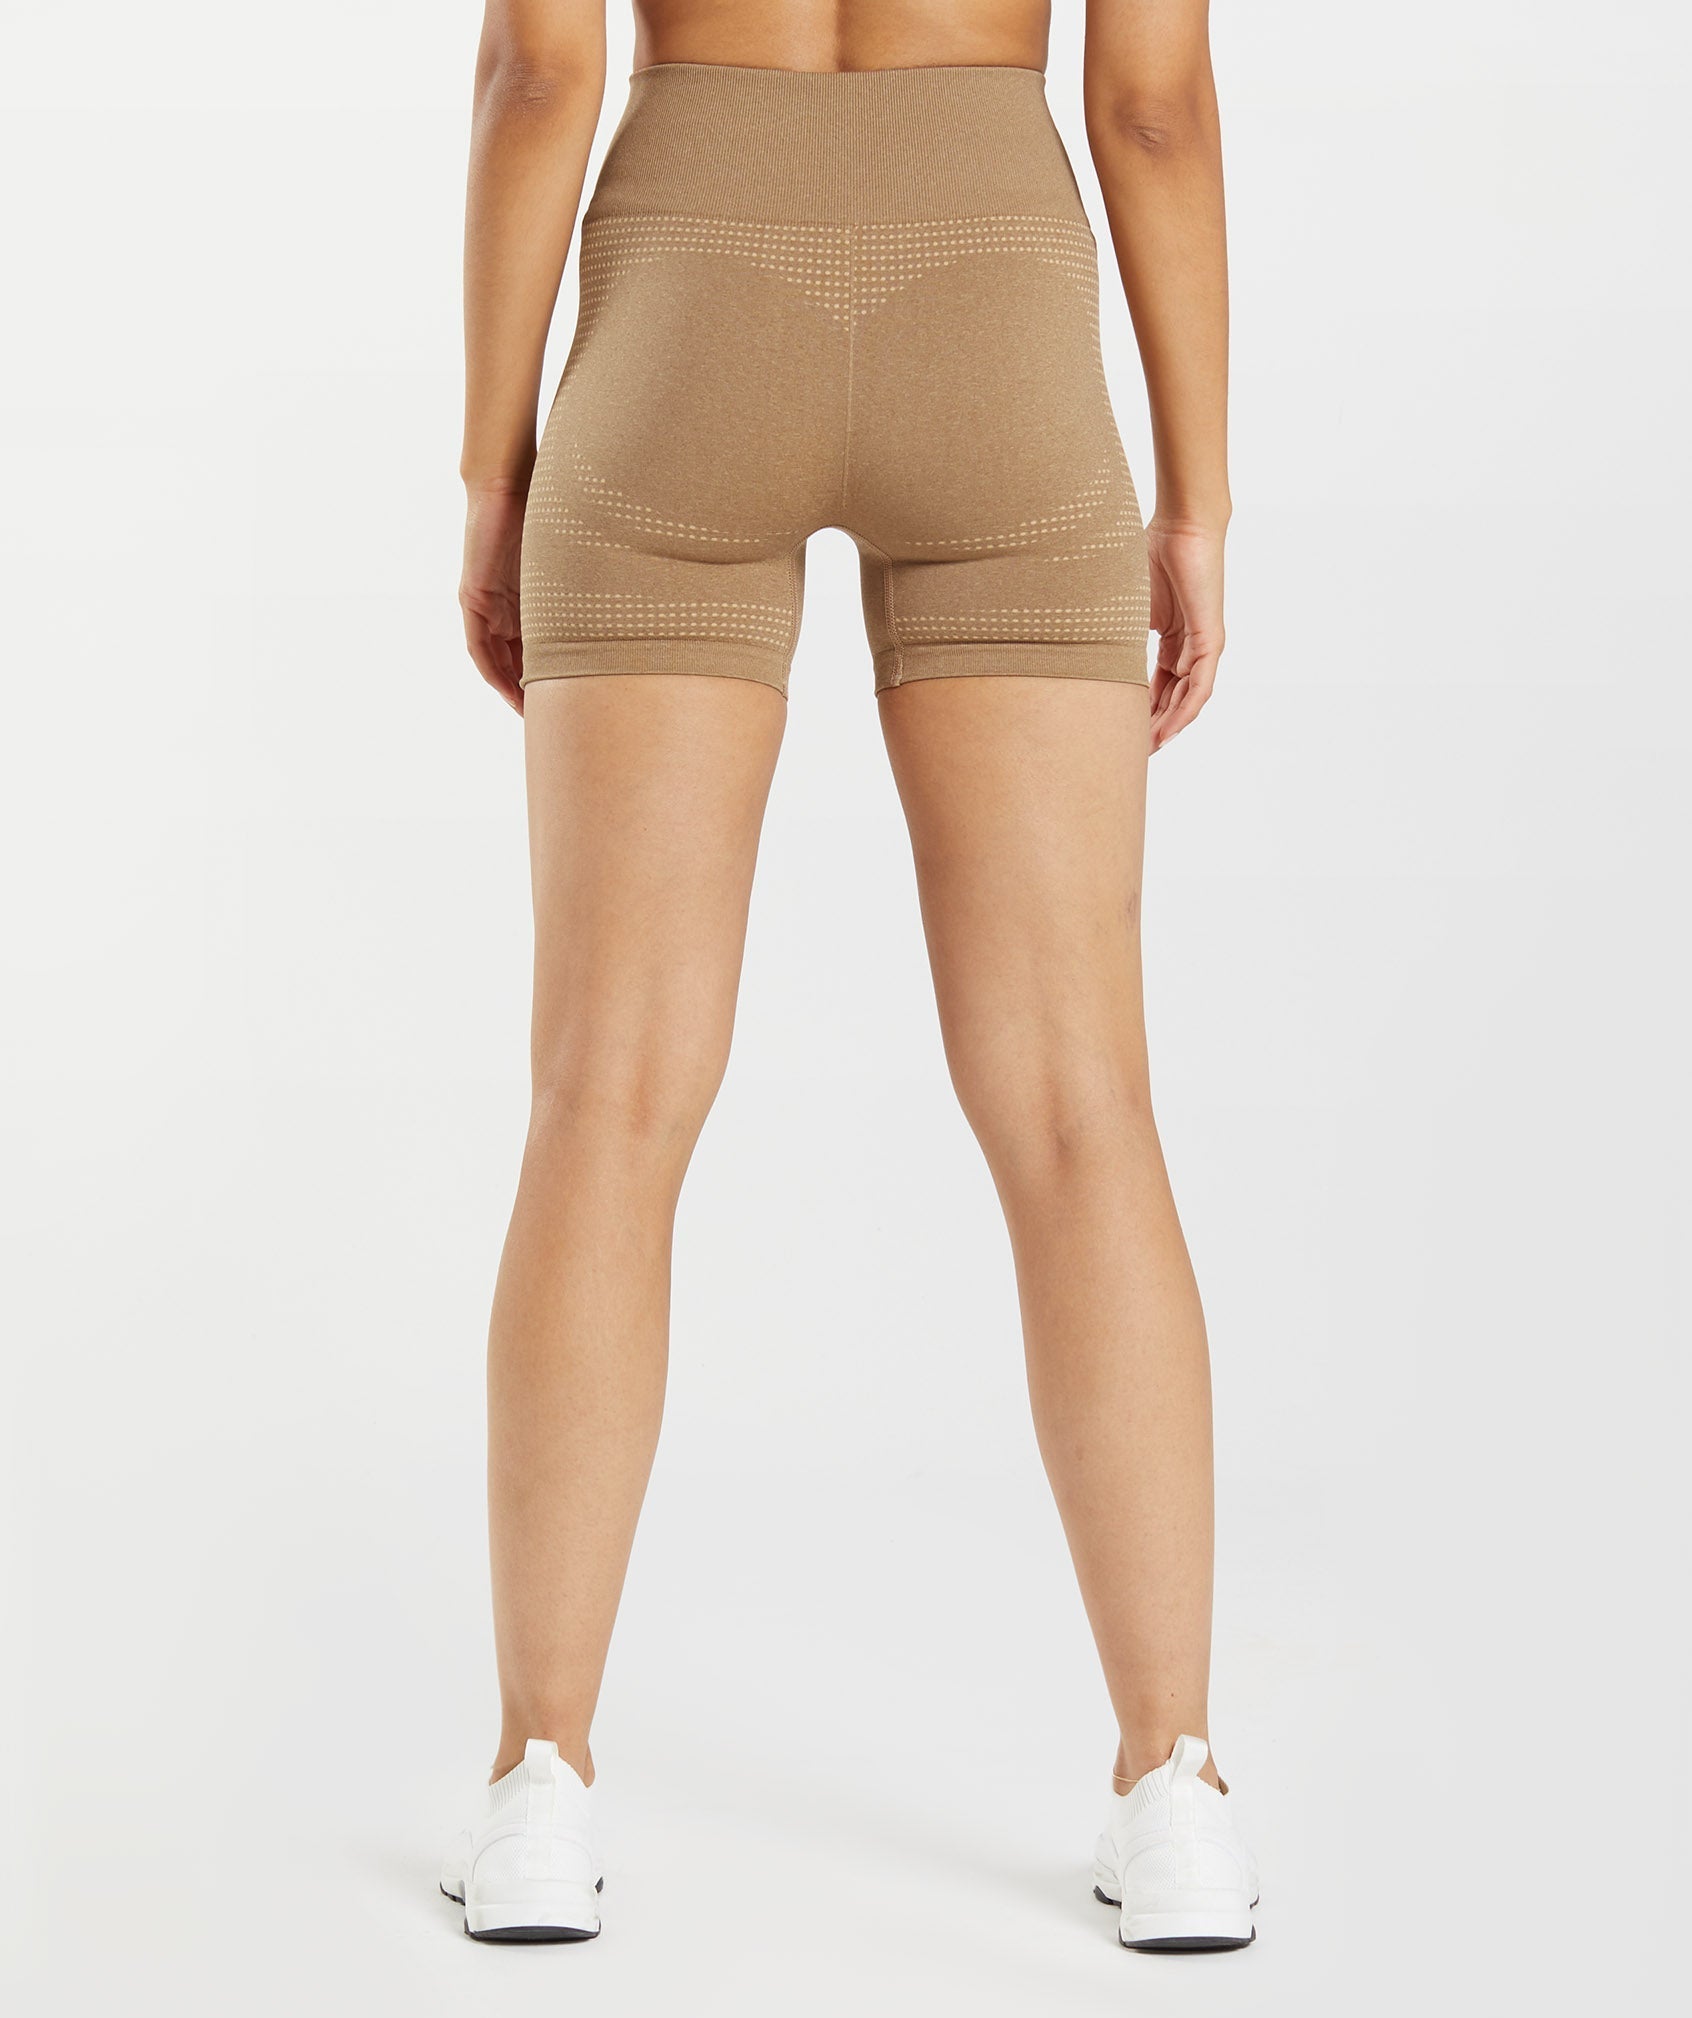 Vital Seamless 2.0 Shorts in Fawn Marl - view 3